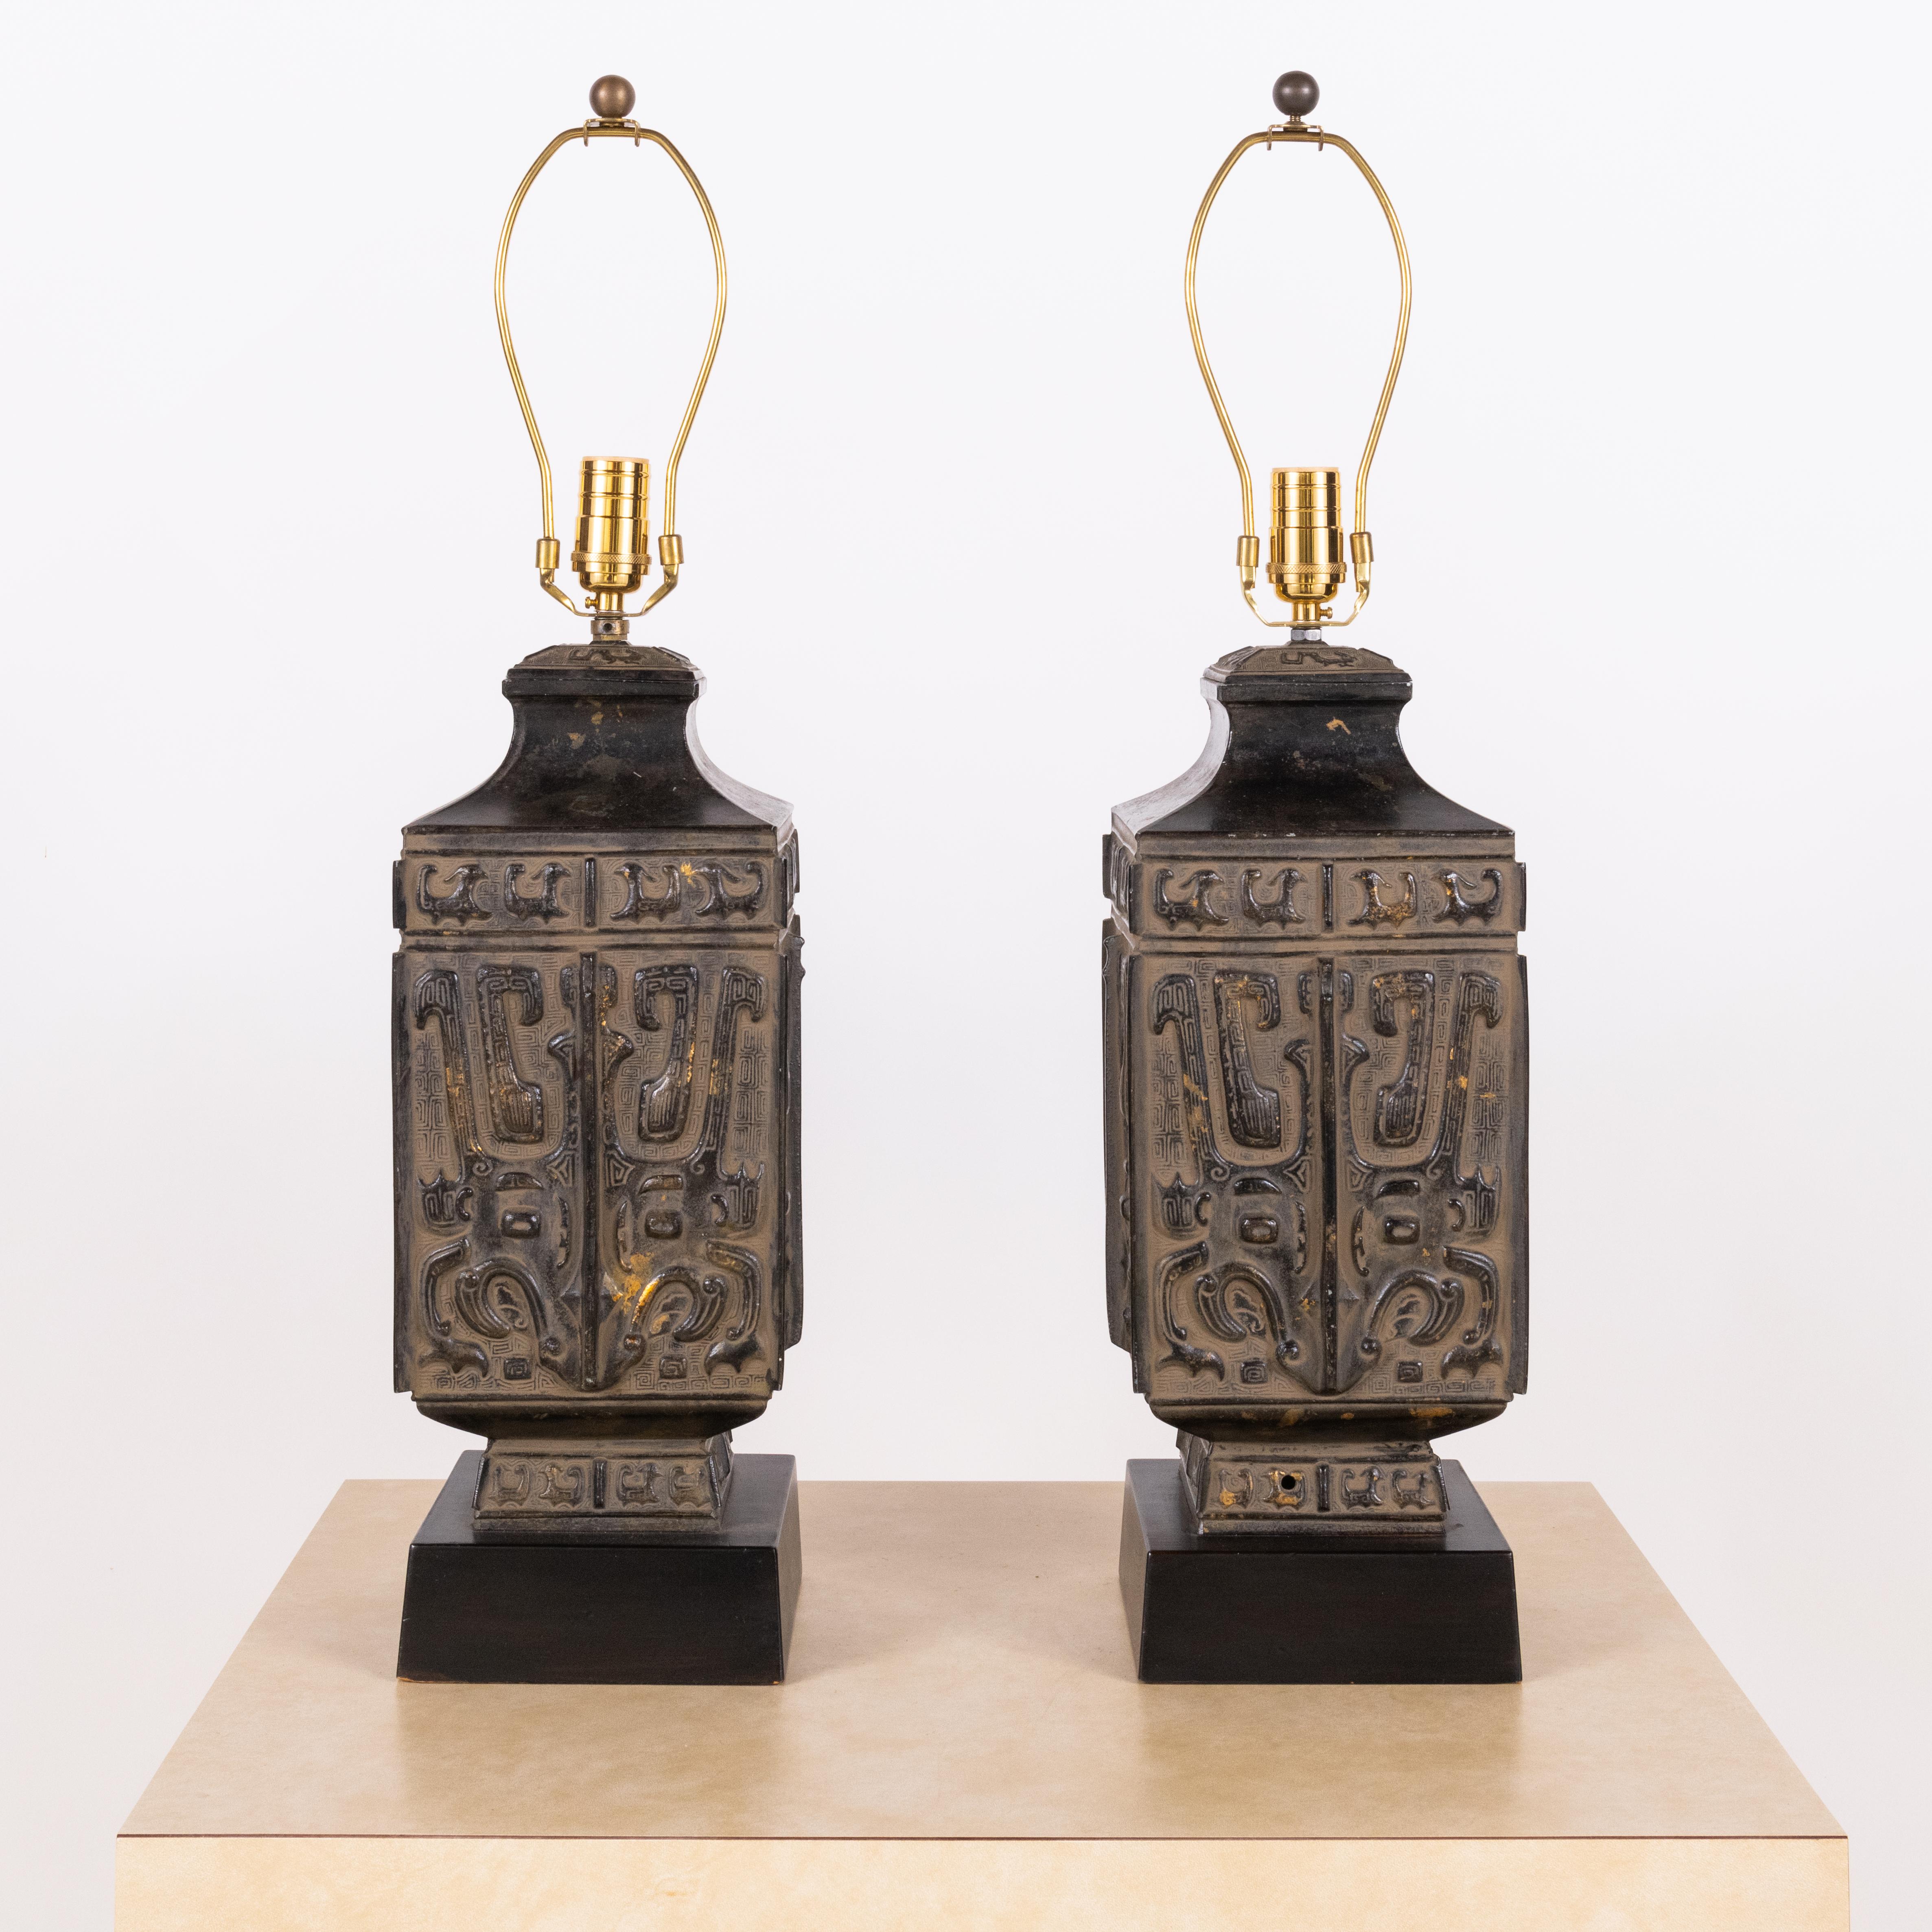 Pair of Hollywood Regency Bronze Chinese Lamps in the style of James Mont.

Beautiful patina.